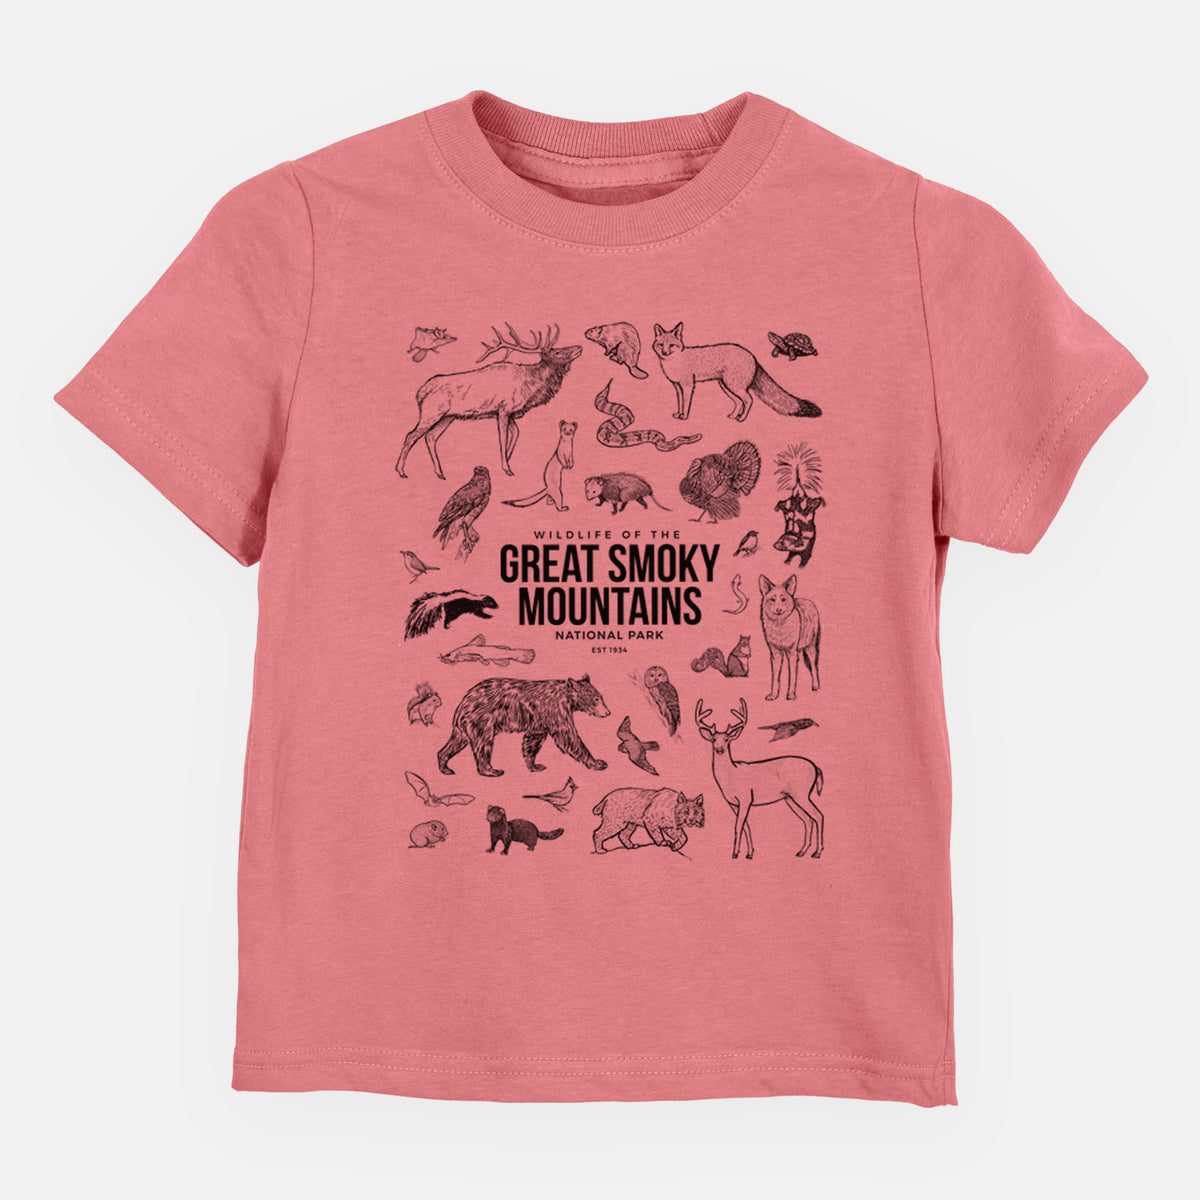 Wildlife of the Great Smoky Mountains National Park - Kids Shirt